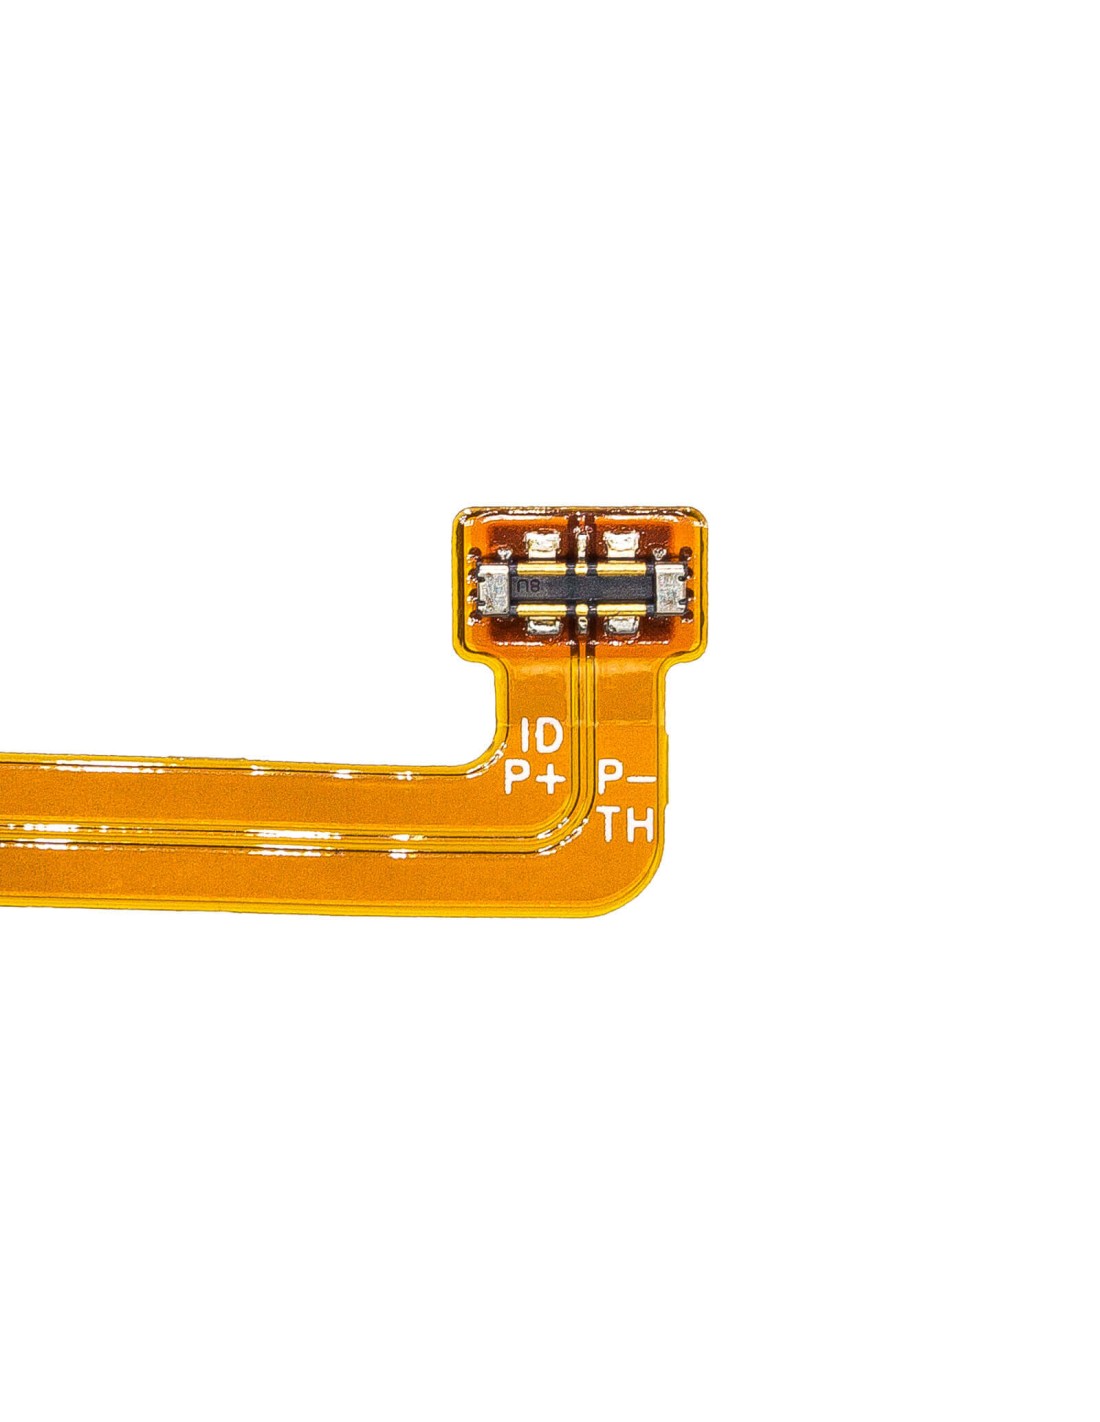 Battery for Samsung, Galaxy M01 2020, Sm-m015, Sm-m015f/ds 3.85V, 3900mAh - 15.02Wh